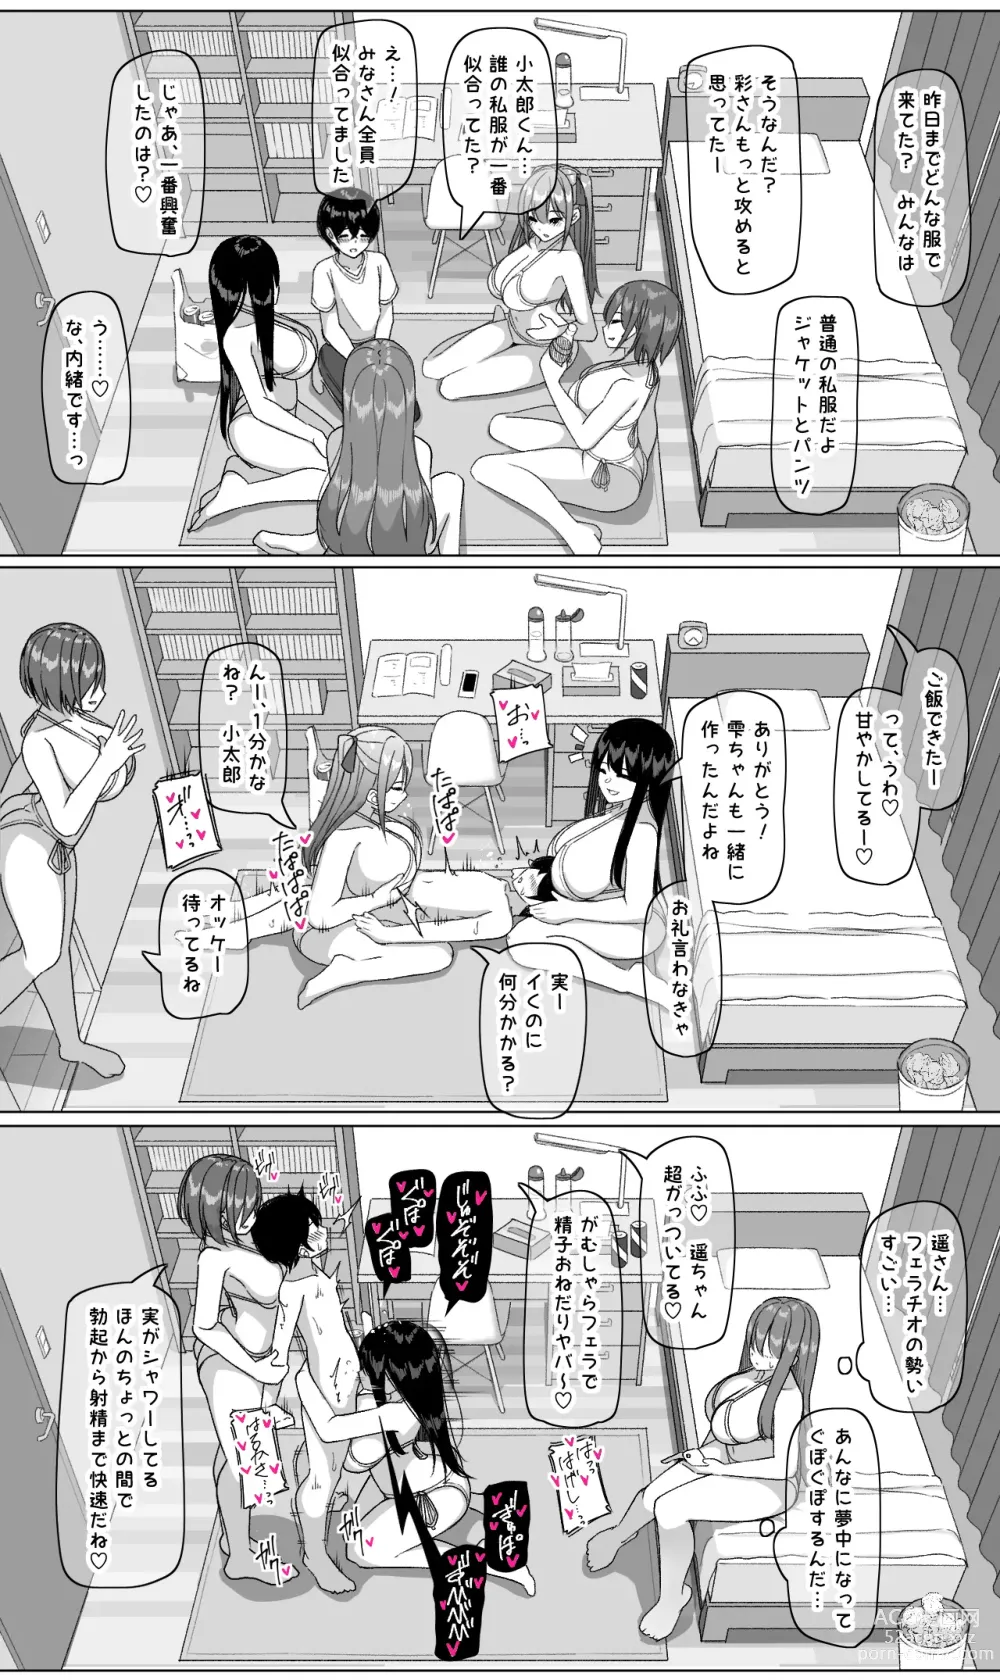 Page 41 of doujinshi Daily Sleepover With Big-breasted Girls